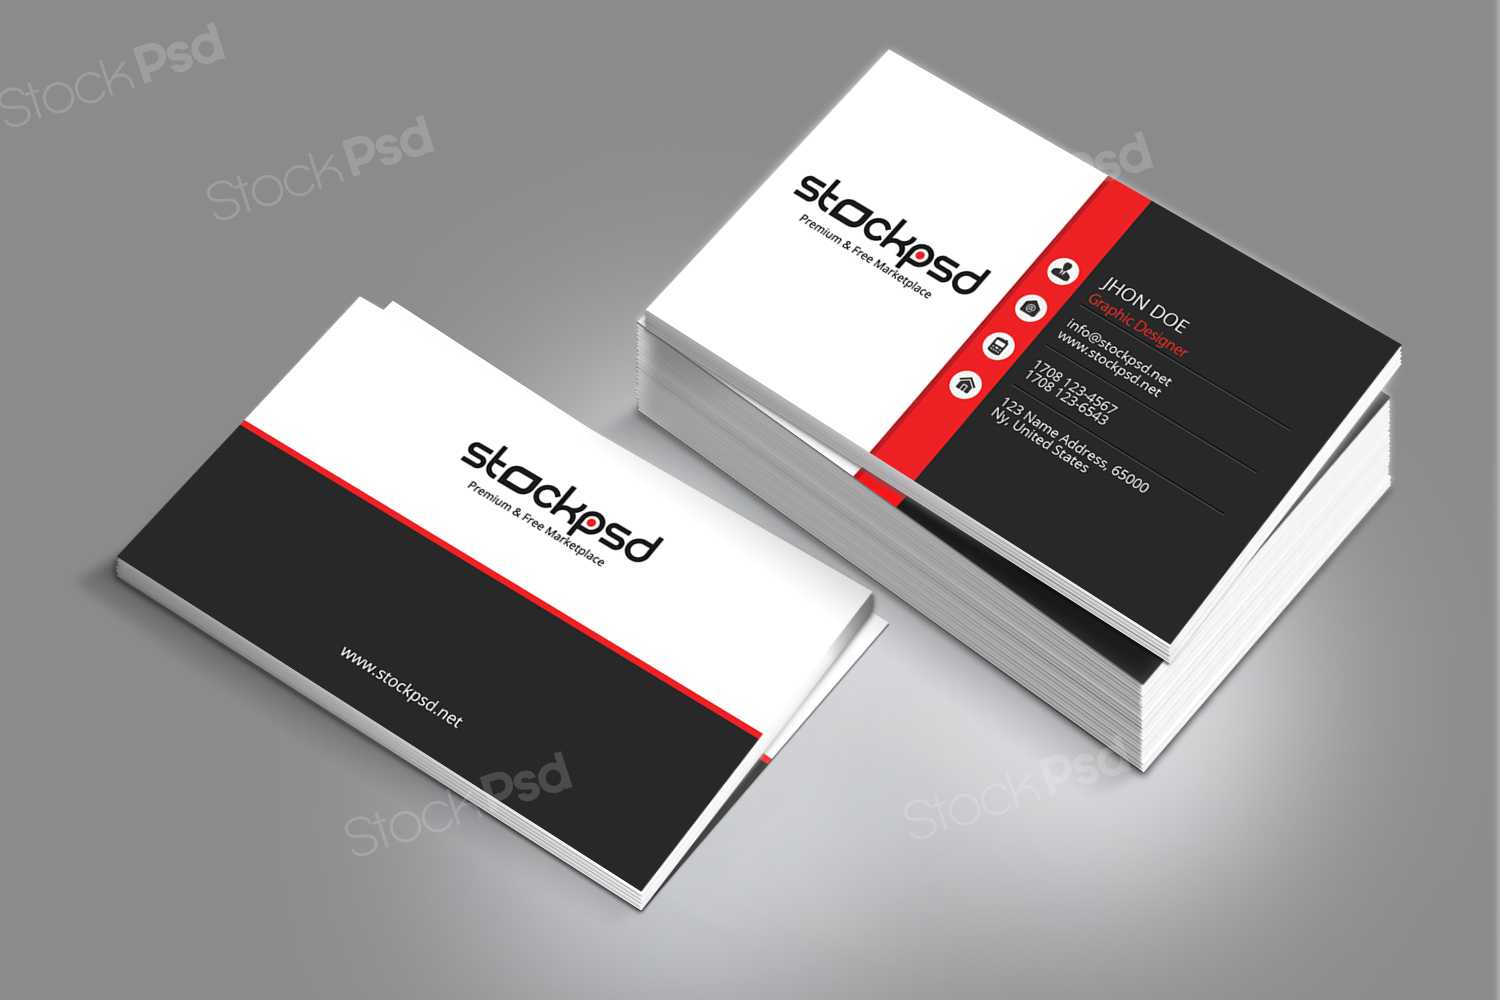 022 Template Ideas Free Photoshop Business Card Personal Psd Throughout Free Personal Business Card Templates